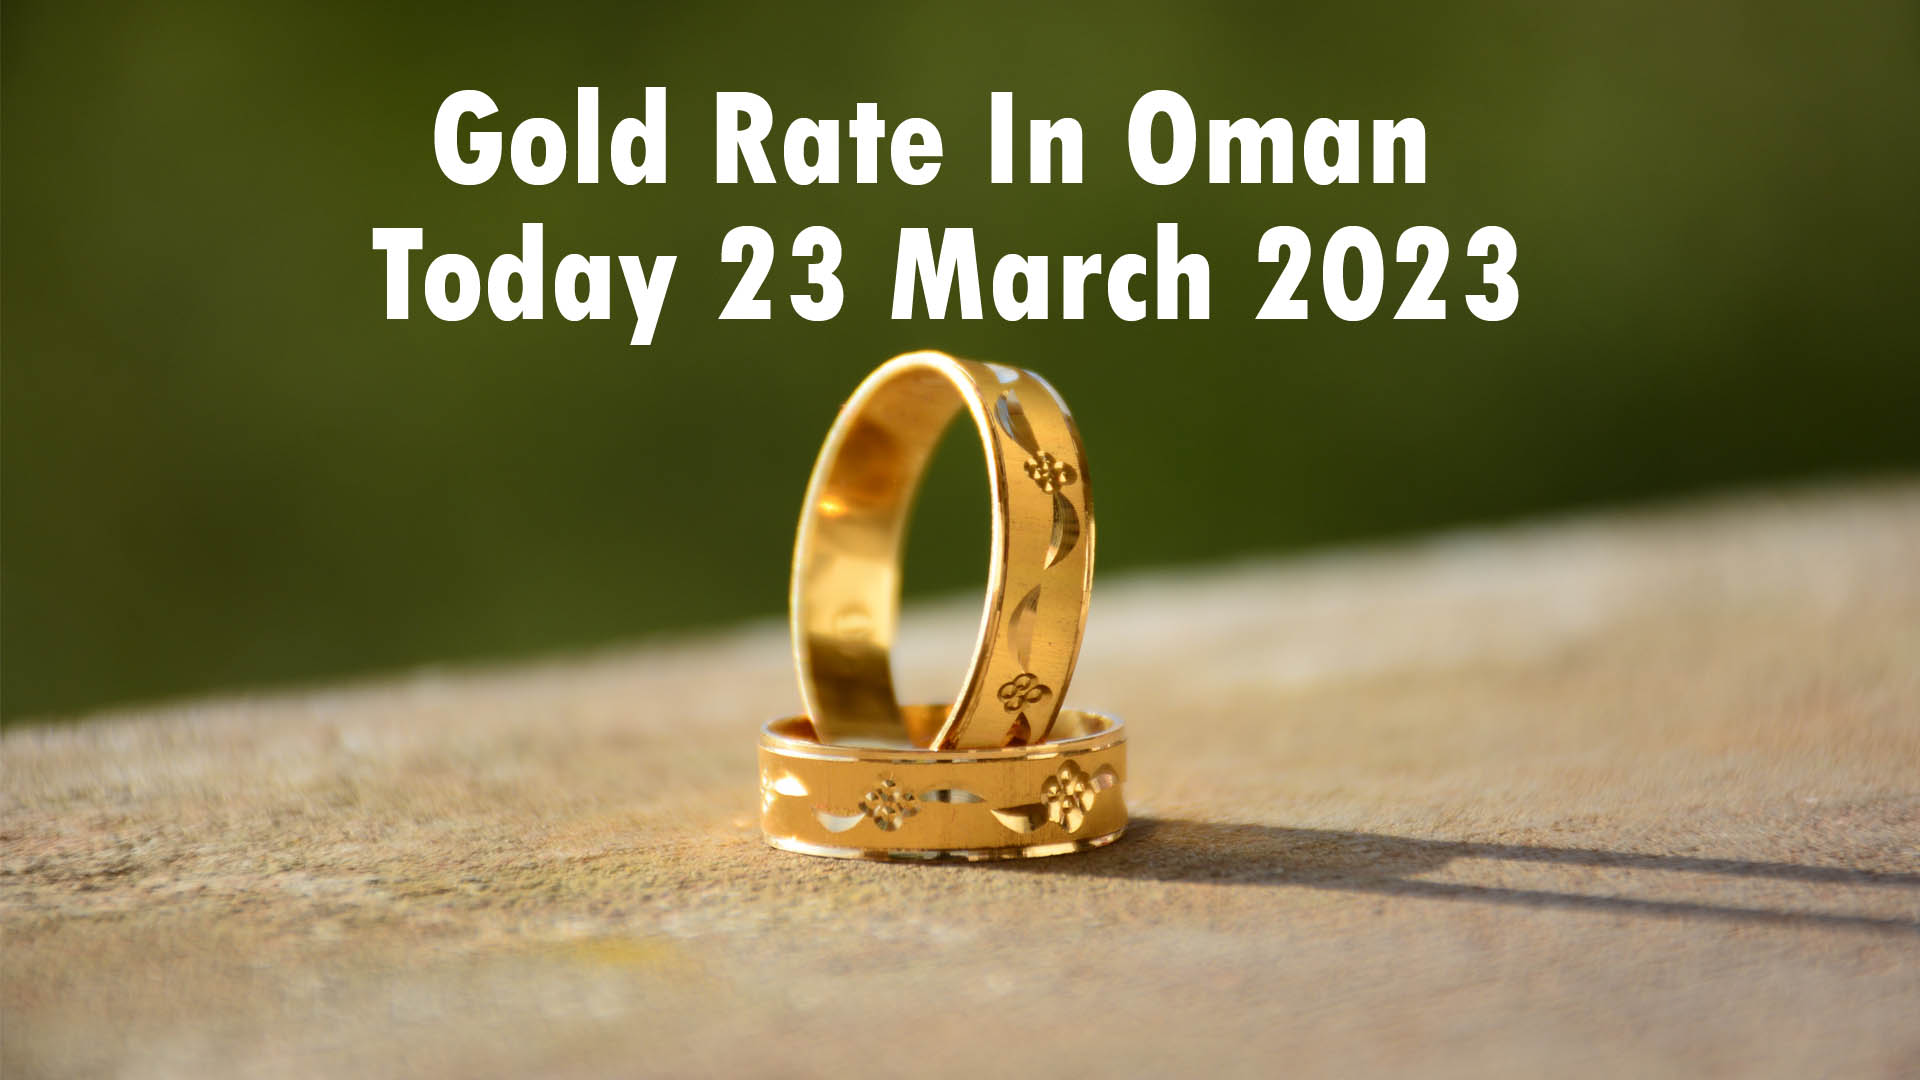 Gold Rate In Oman Today 23 March 2023